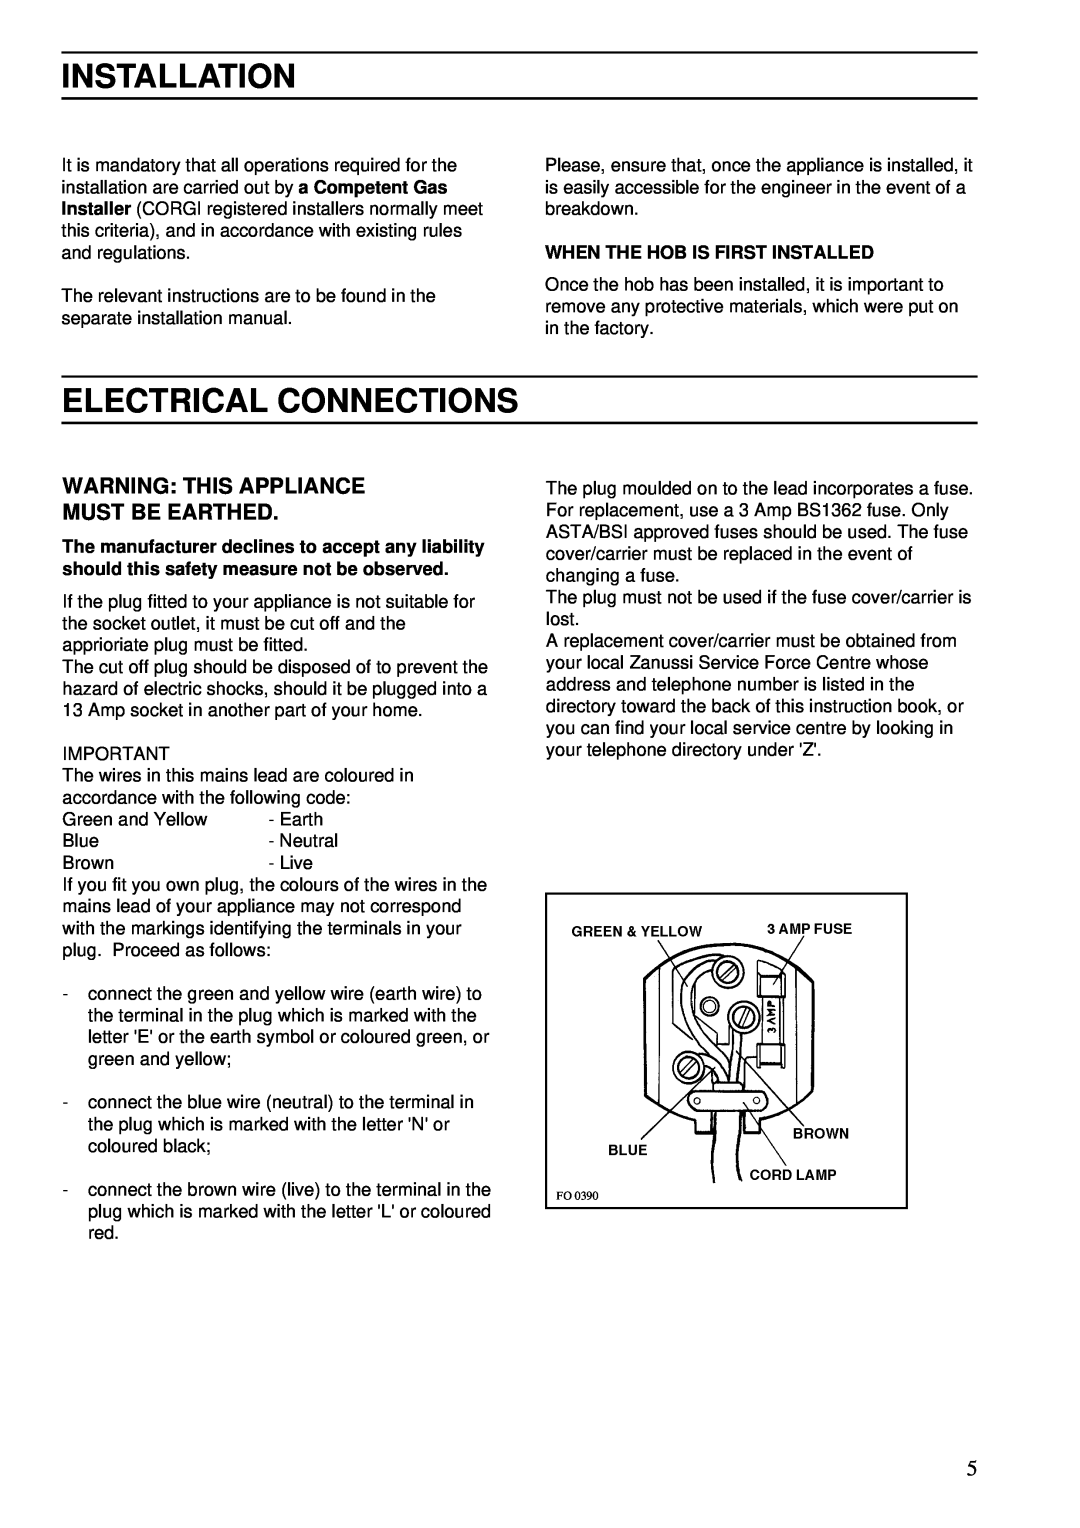 Zanussi ZGA 75 B manual Installation, Electrical Connections, Warning: This Appliance Must Be Earthed 